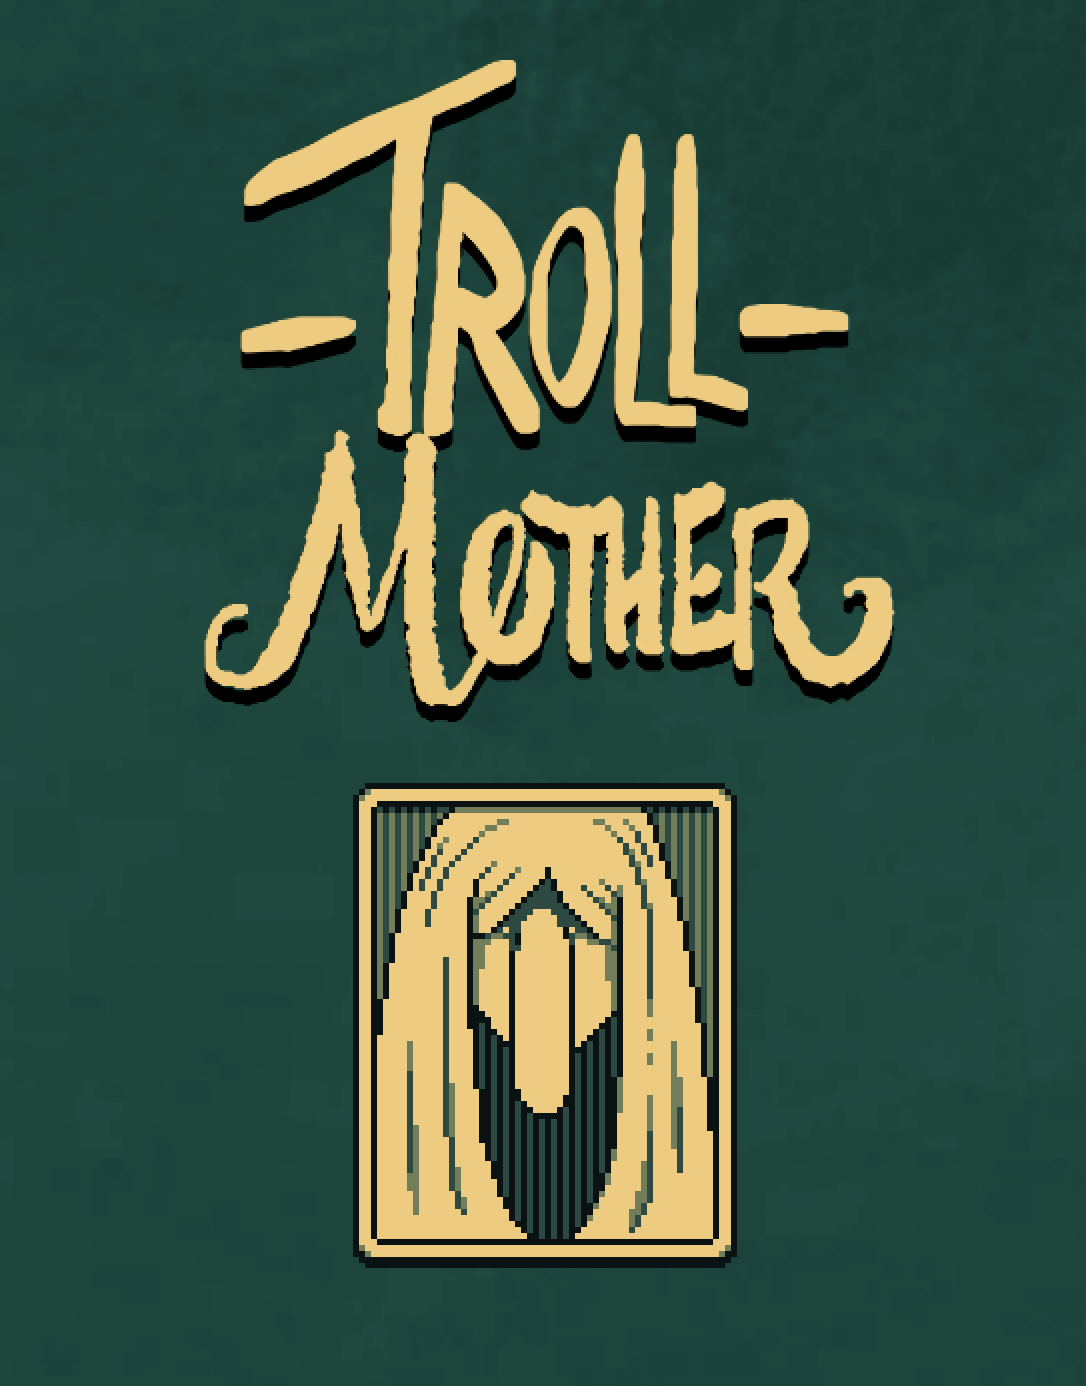 Trollmother